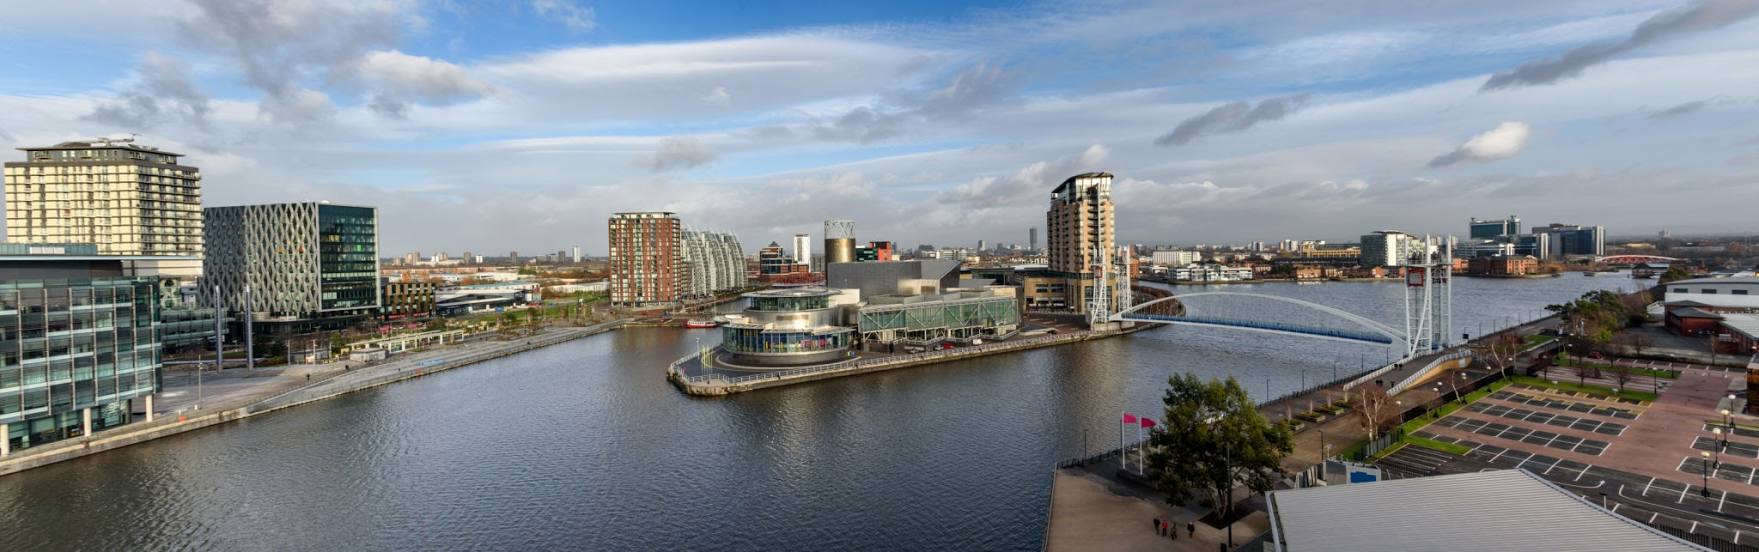 The Quays, Manchester